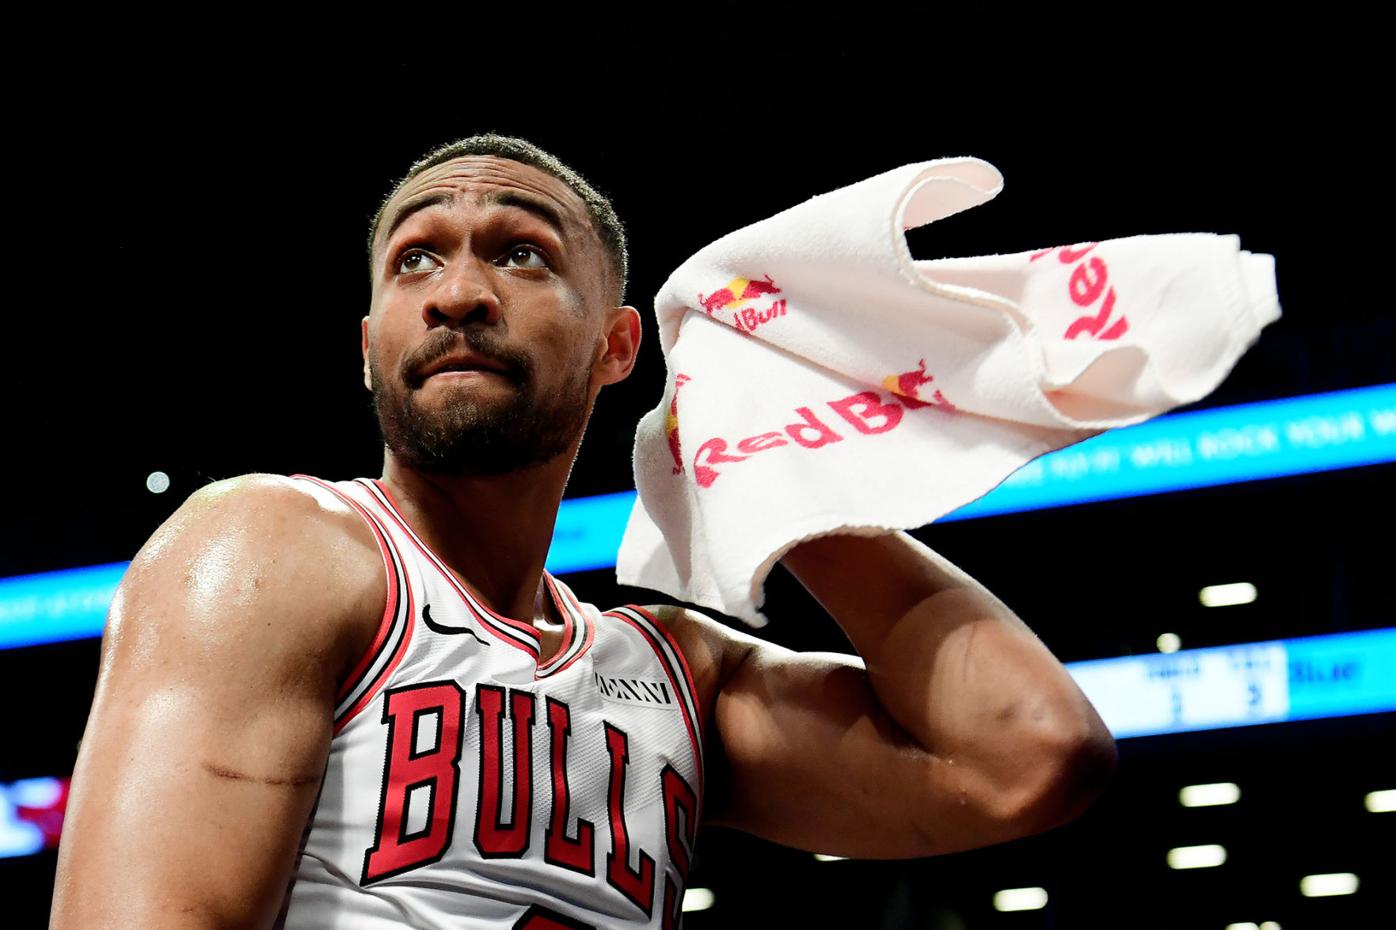 Former Buck Jabari Parker agrees to $40 million, 2-year deal with Bulls